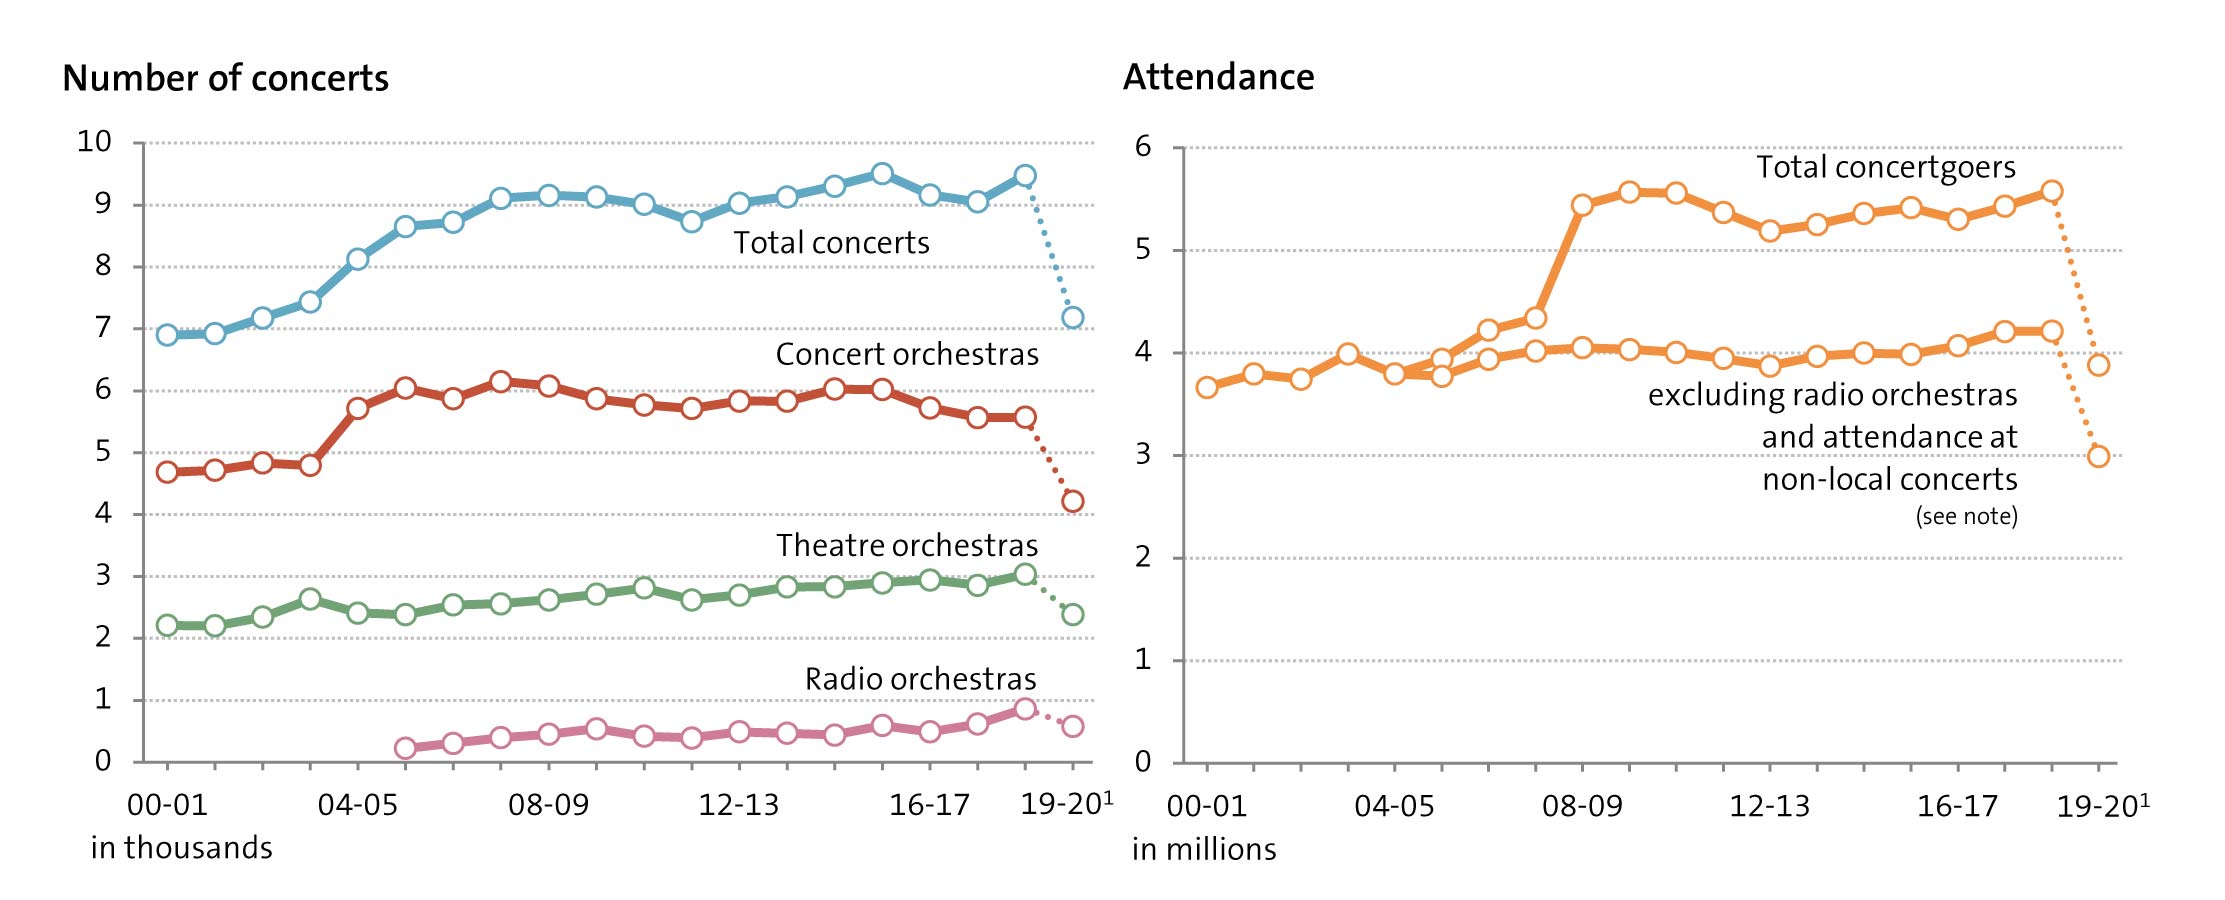 Figure: Concerts and attentance between 2000-01 and 2019-20